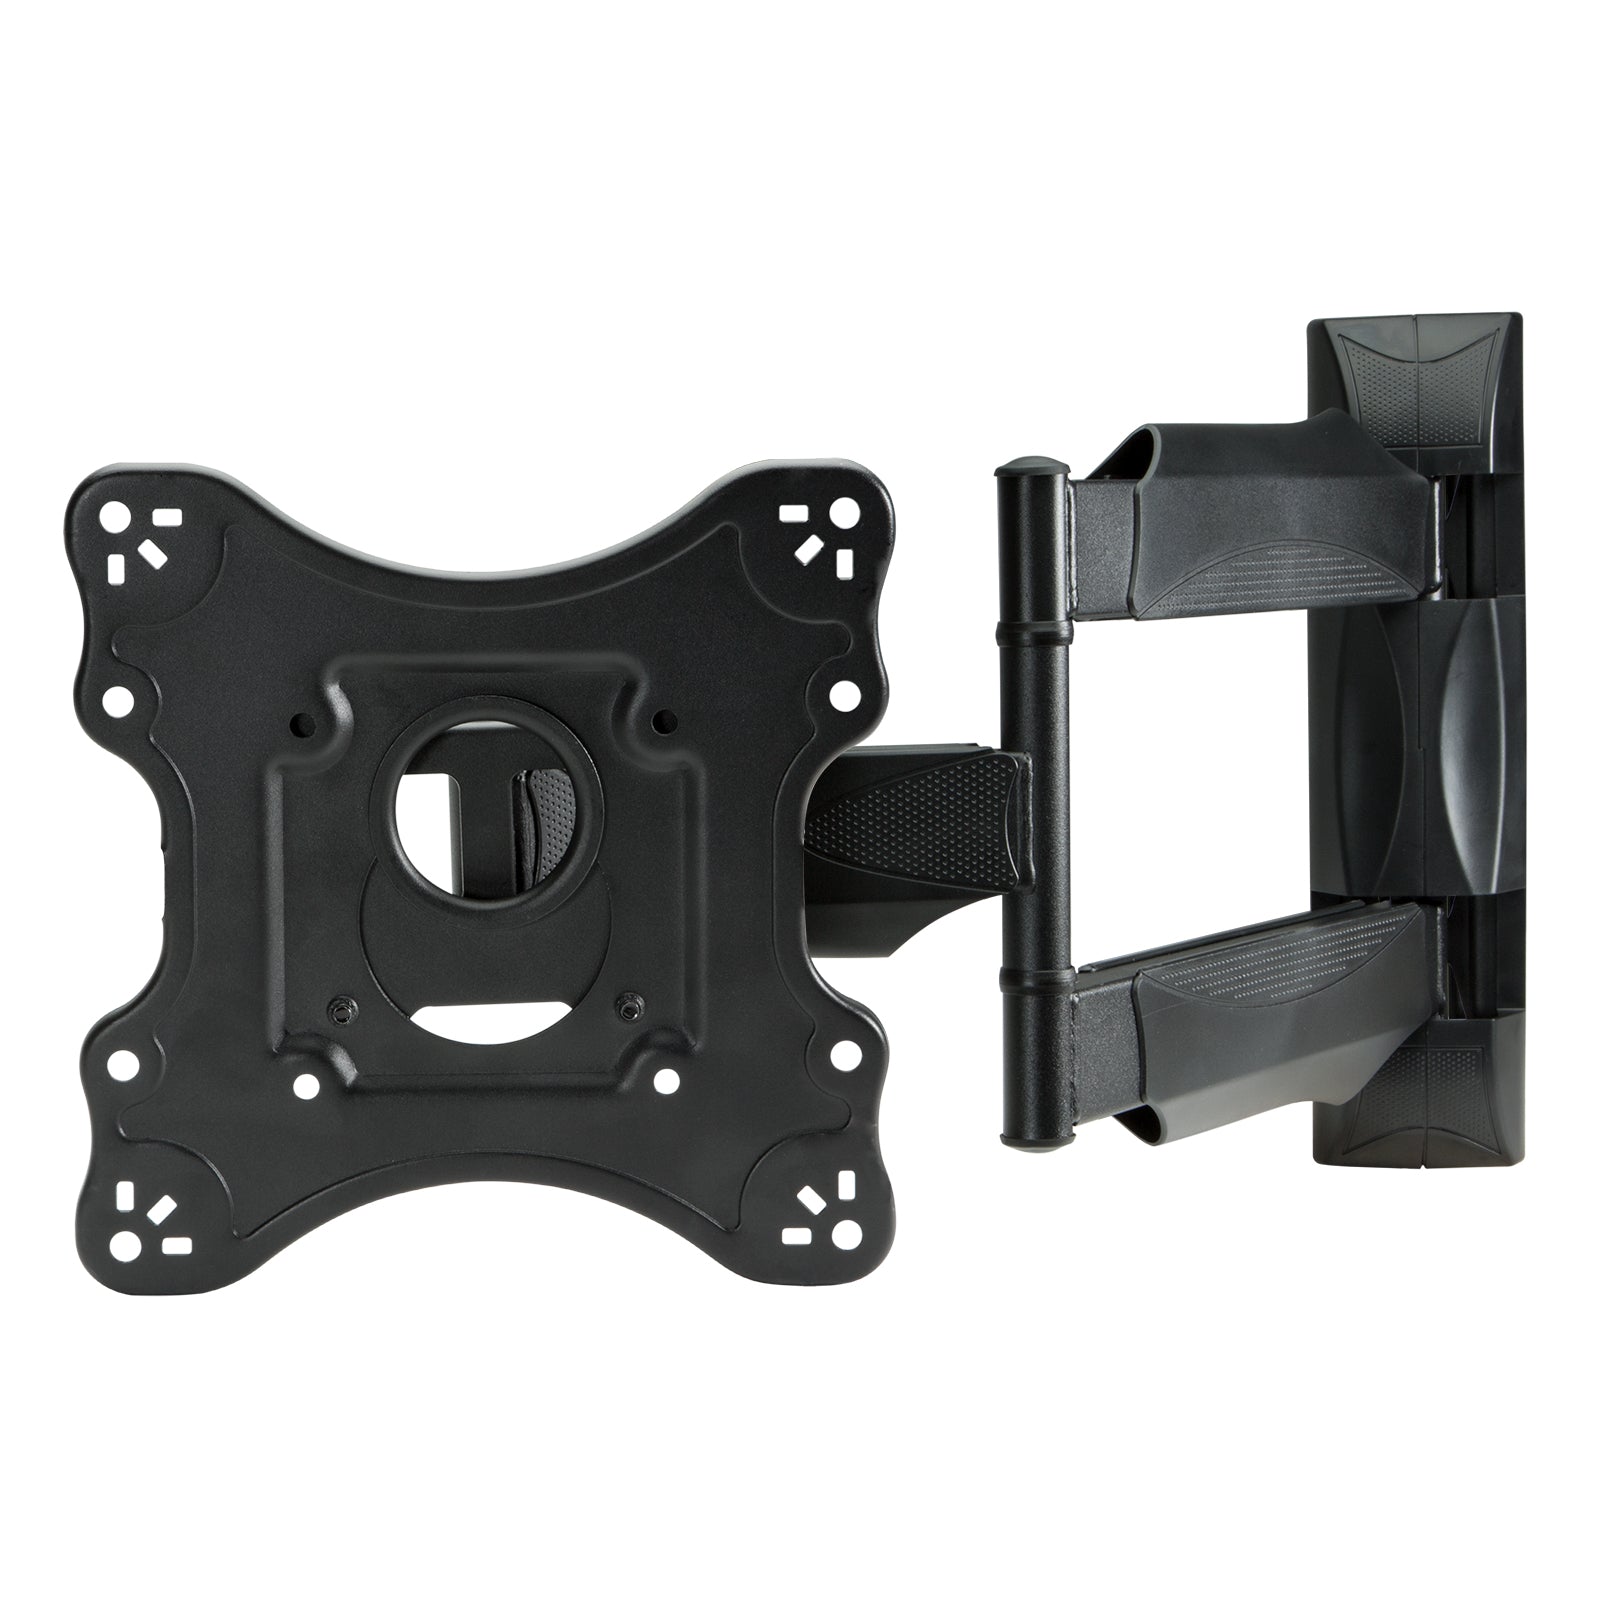 TV Wall Mount Monitor Bracket for 32-52 Inch LED, Universal Fit, Swivel, Tilt, Articulating with 10 HDMI Cable